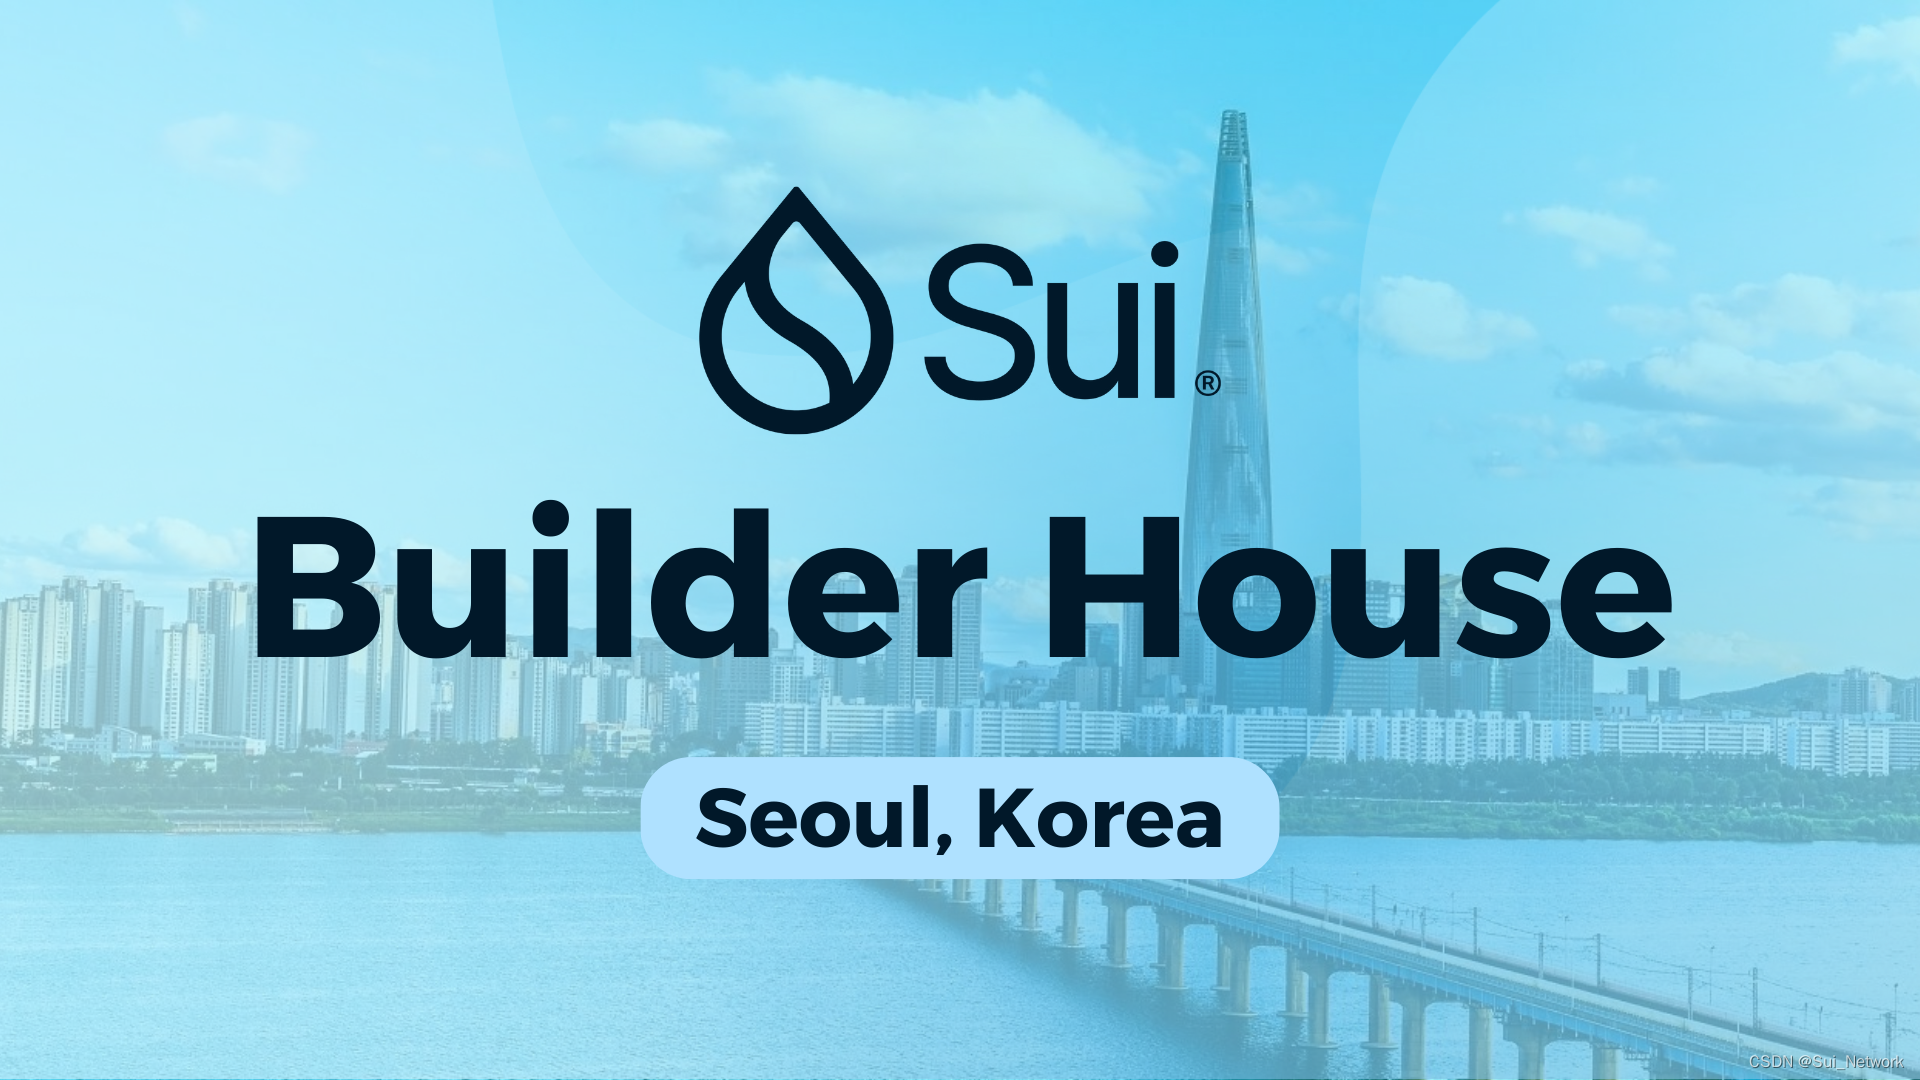 Sui Builder House首尔站倒计时！